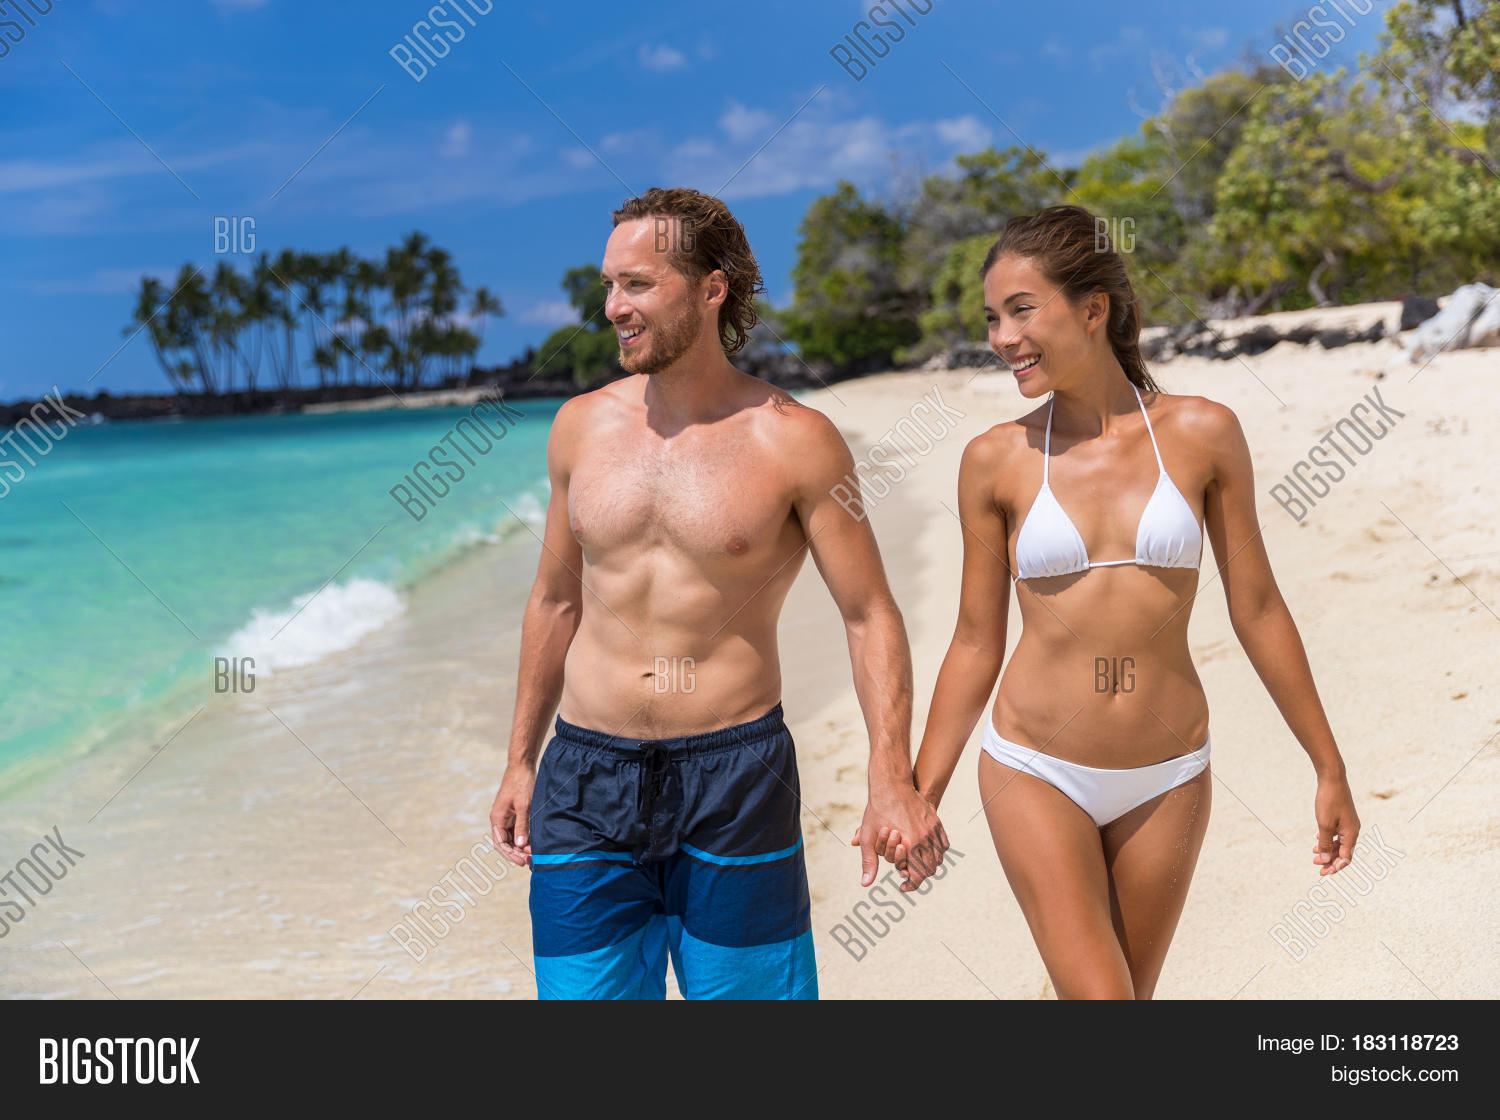 dillon tompkins recommends sexy couple on the beach pic